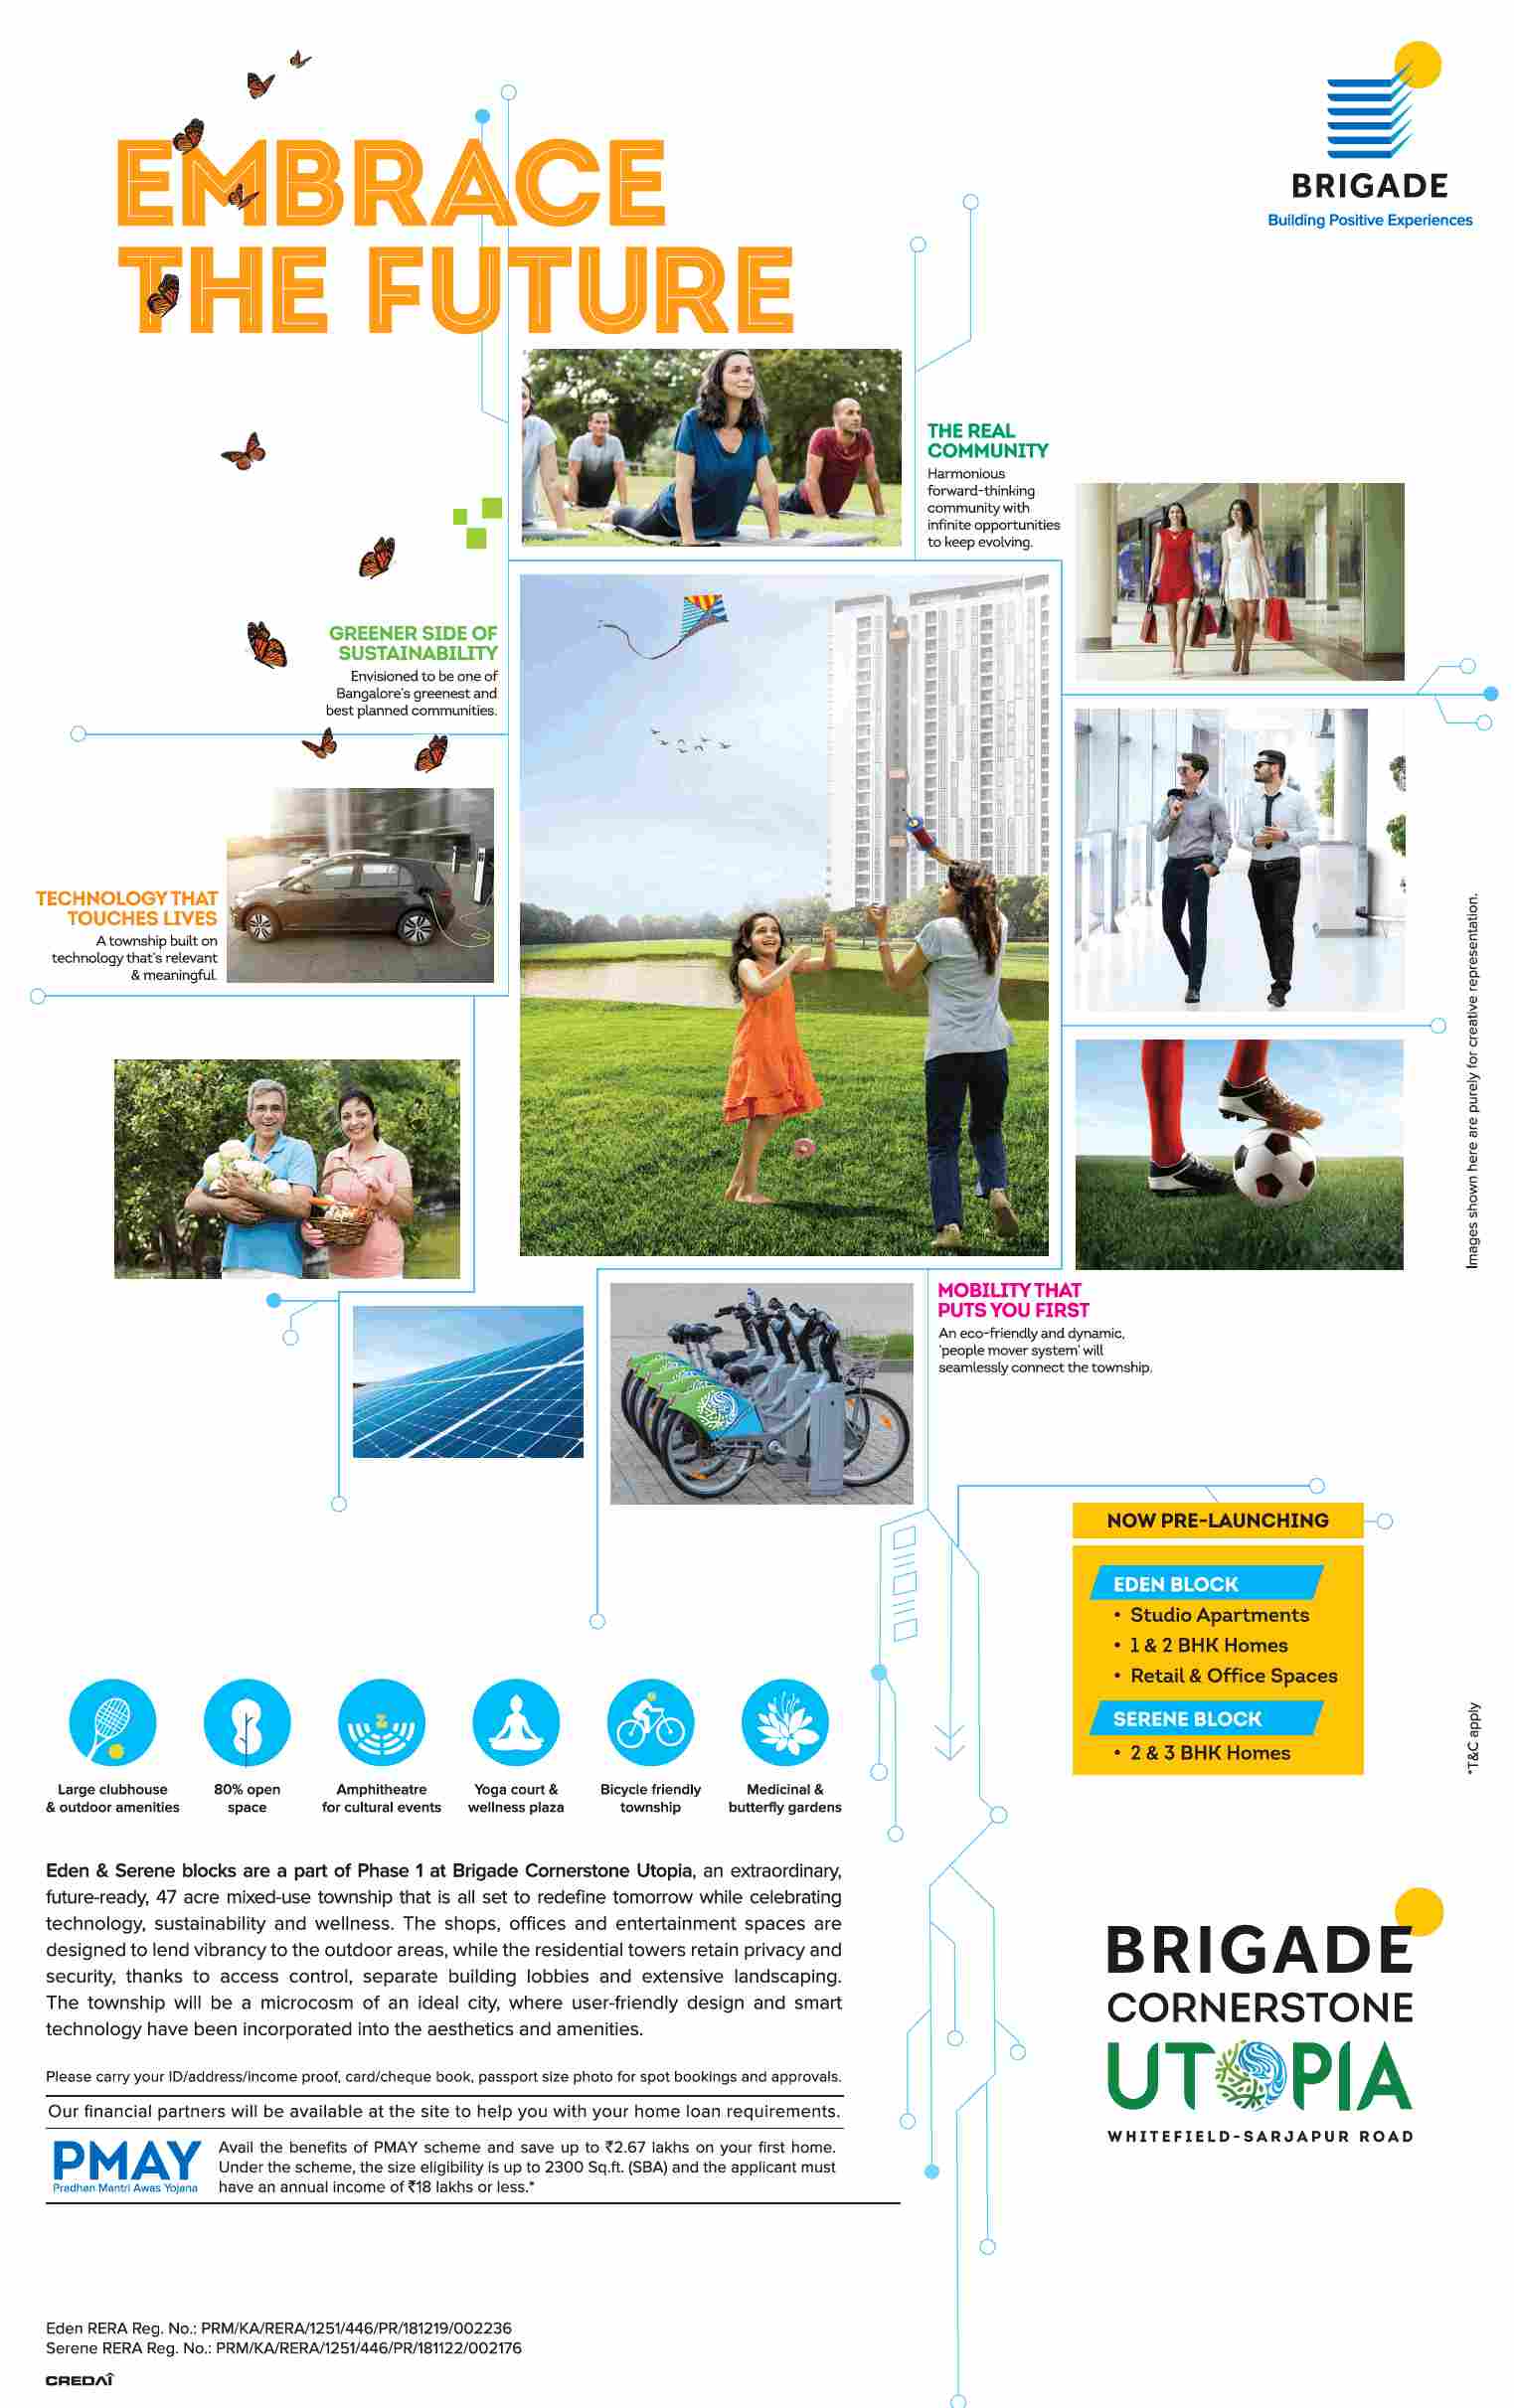 Embrace the future by residing at Brigade Utopia in Bangalore